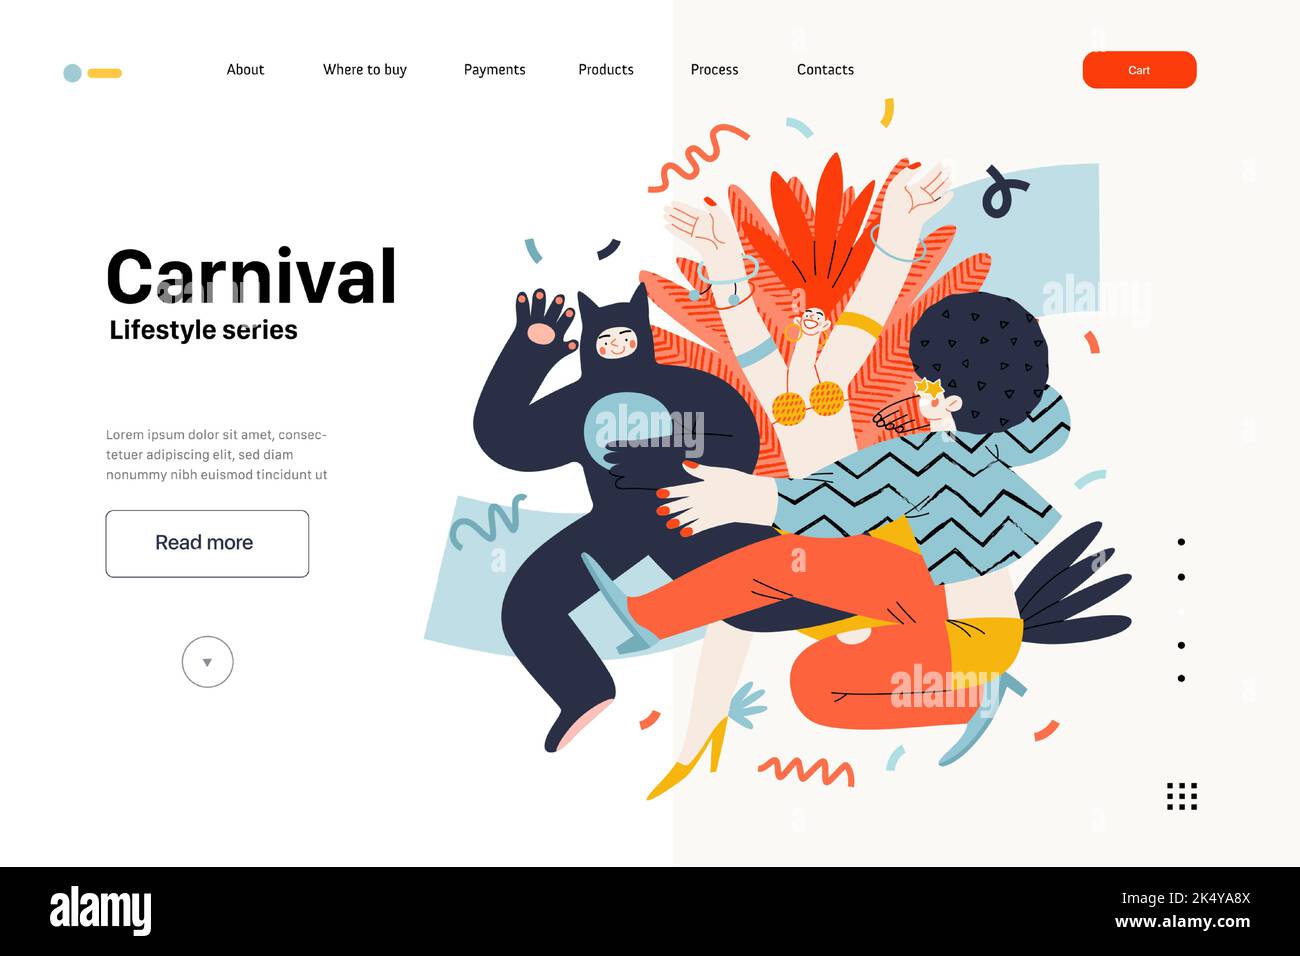 Lifestyle web template - Carnival - modern flat vector illustration of masked people dancing together, taking part in the costume carnival procession. Stock Vector